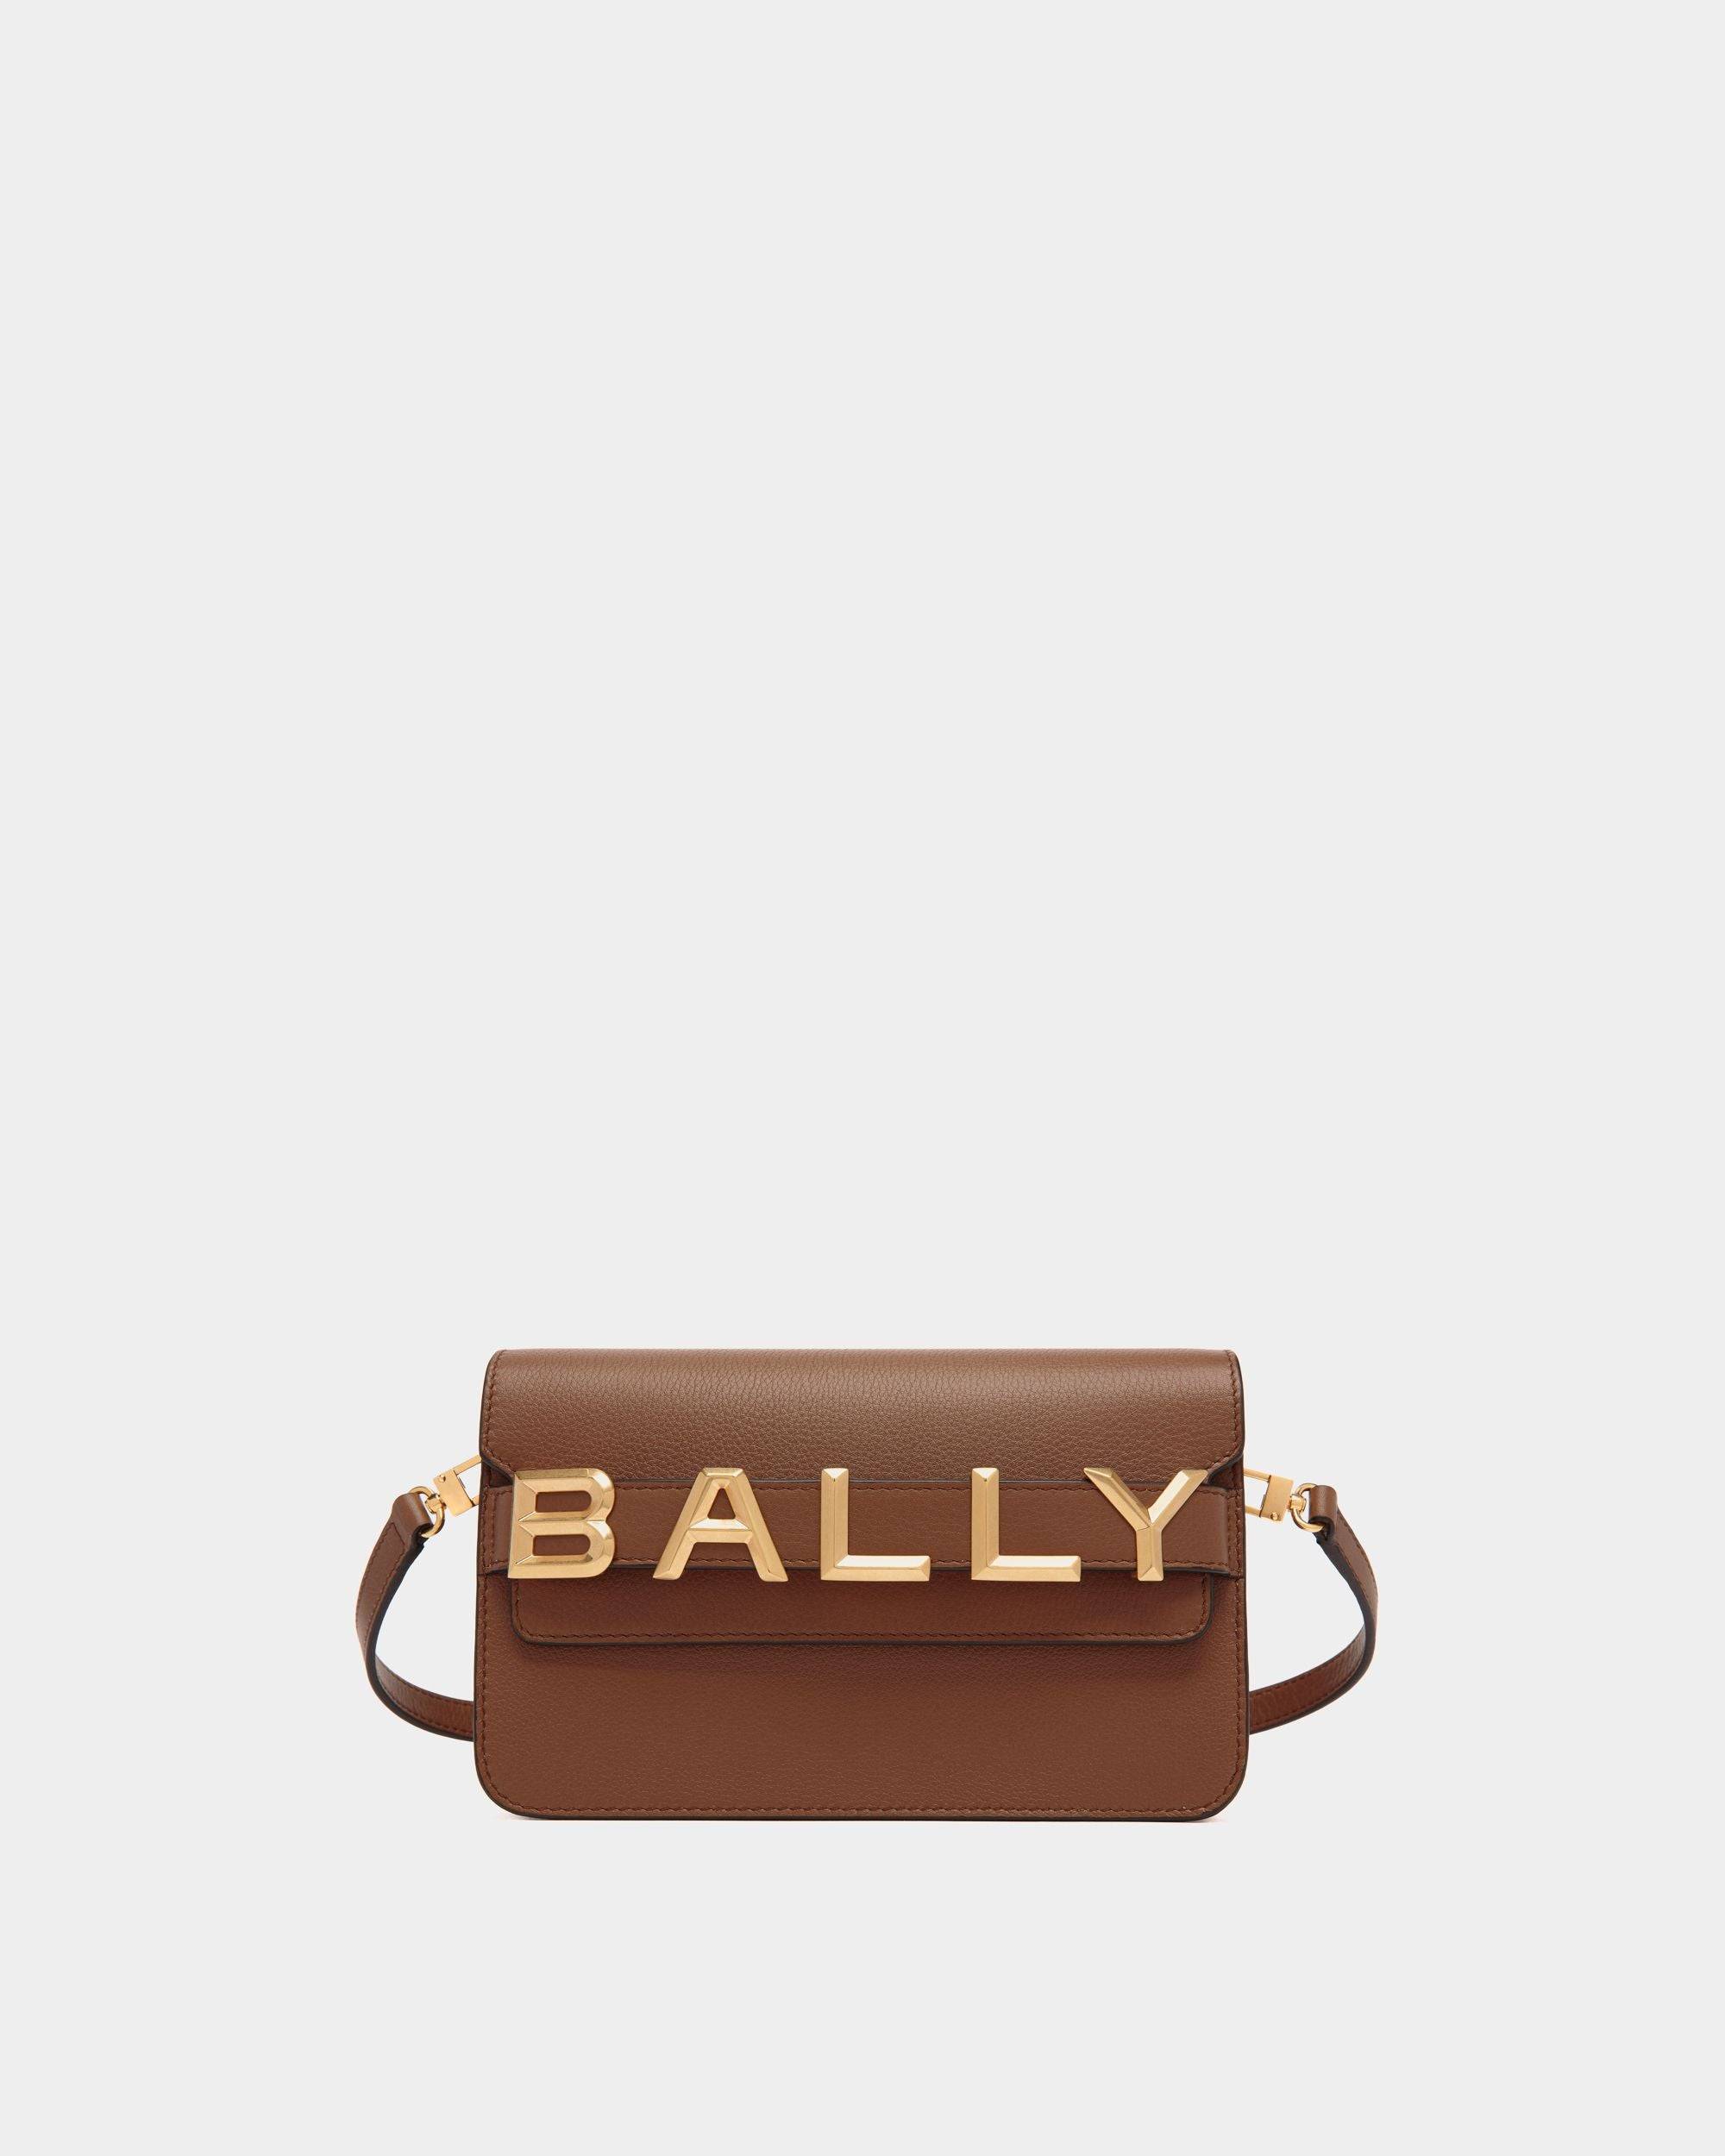 Women's Bally Spell Crossbody Bag in Brown Suede | Bally | Still Life Front